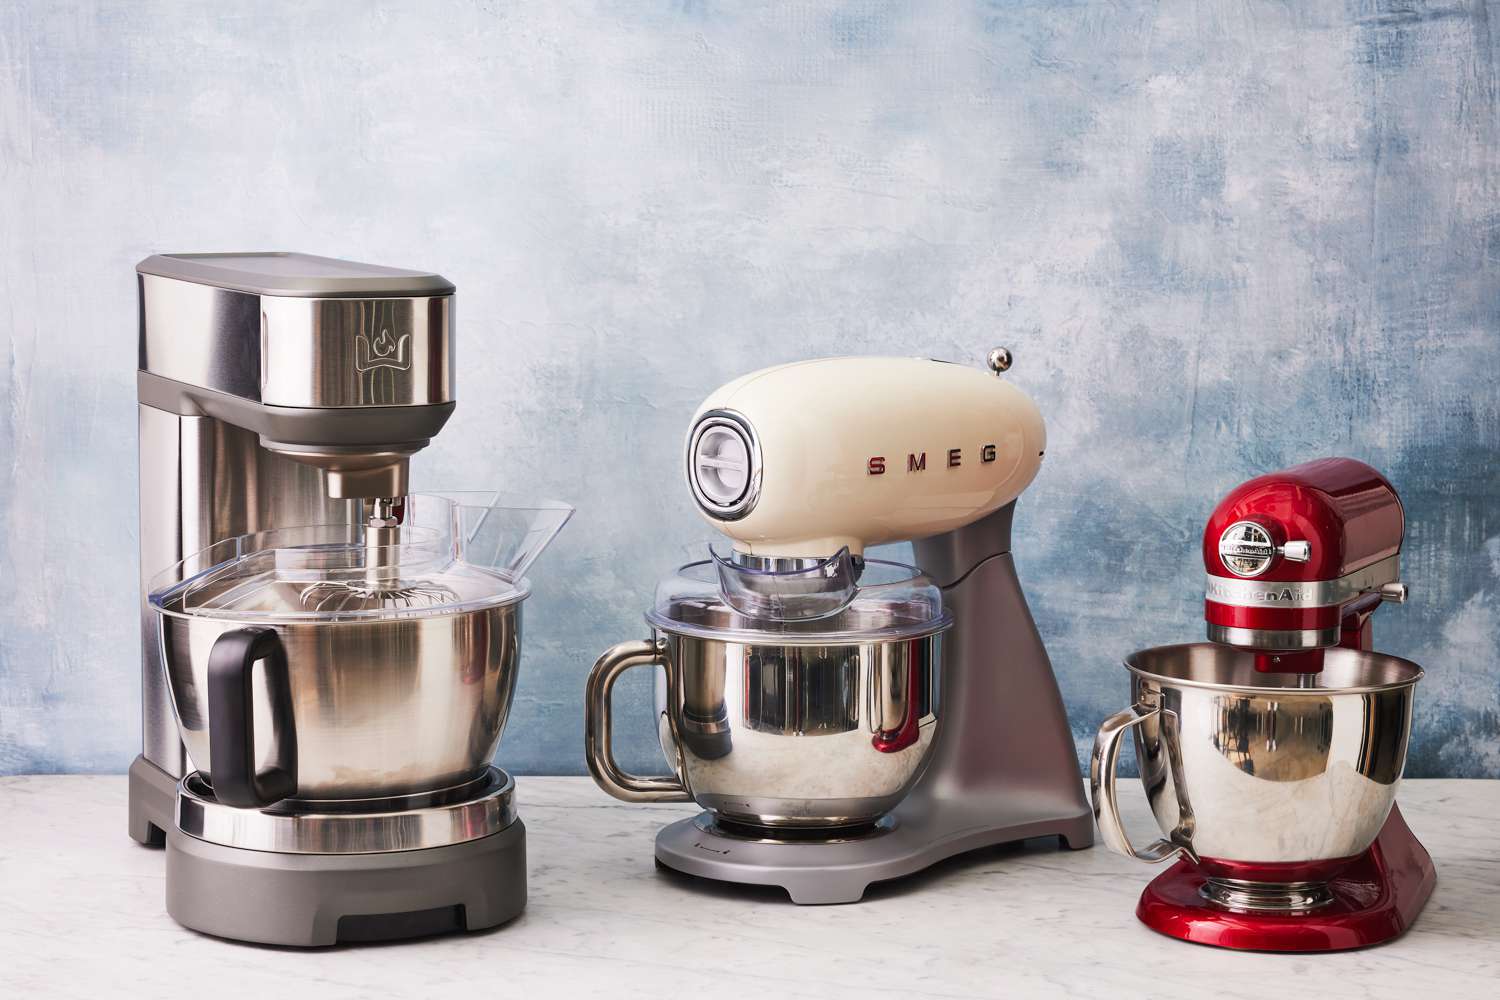 KitchenAid Artisan vs Professional stand mixer: what’s the difference